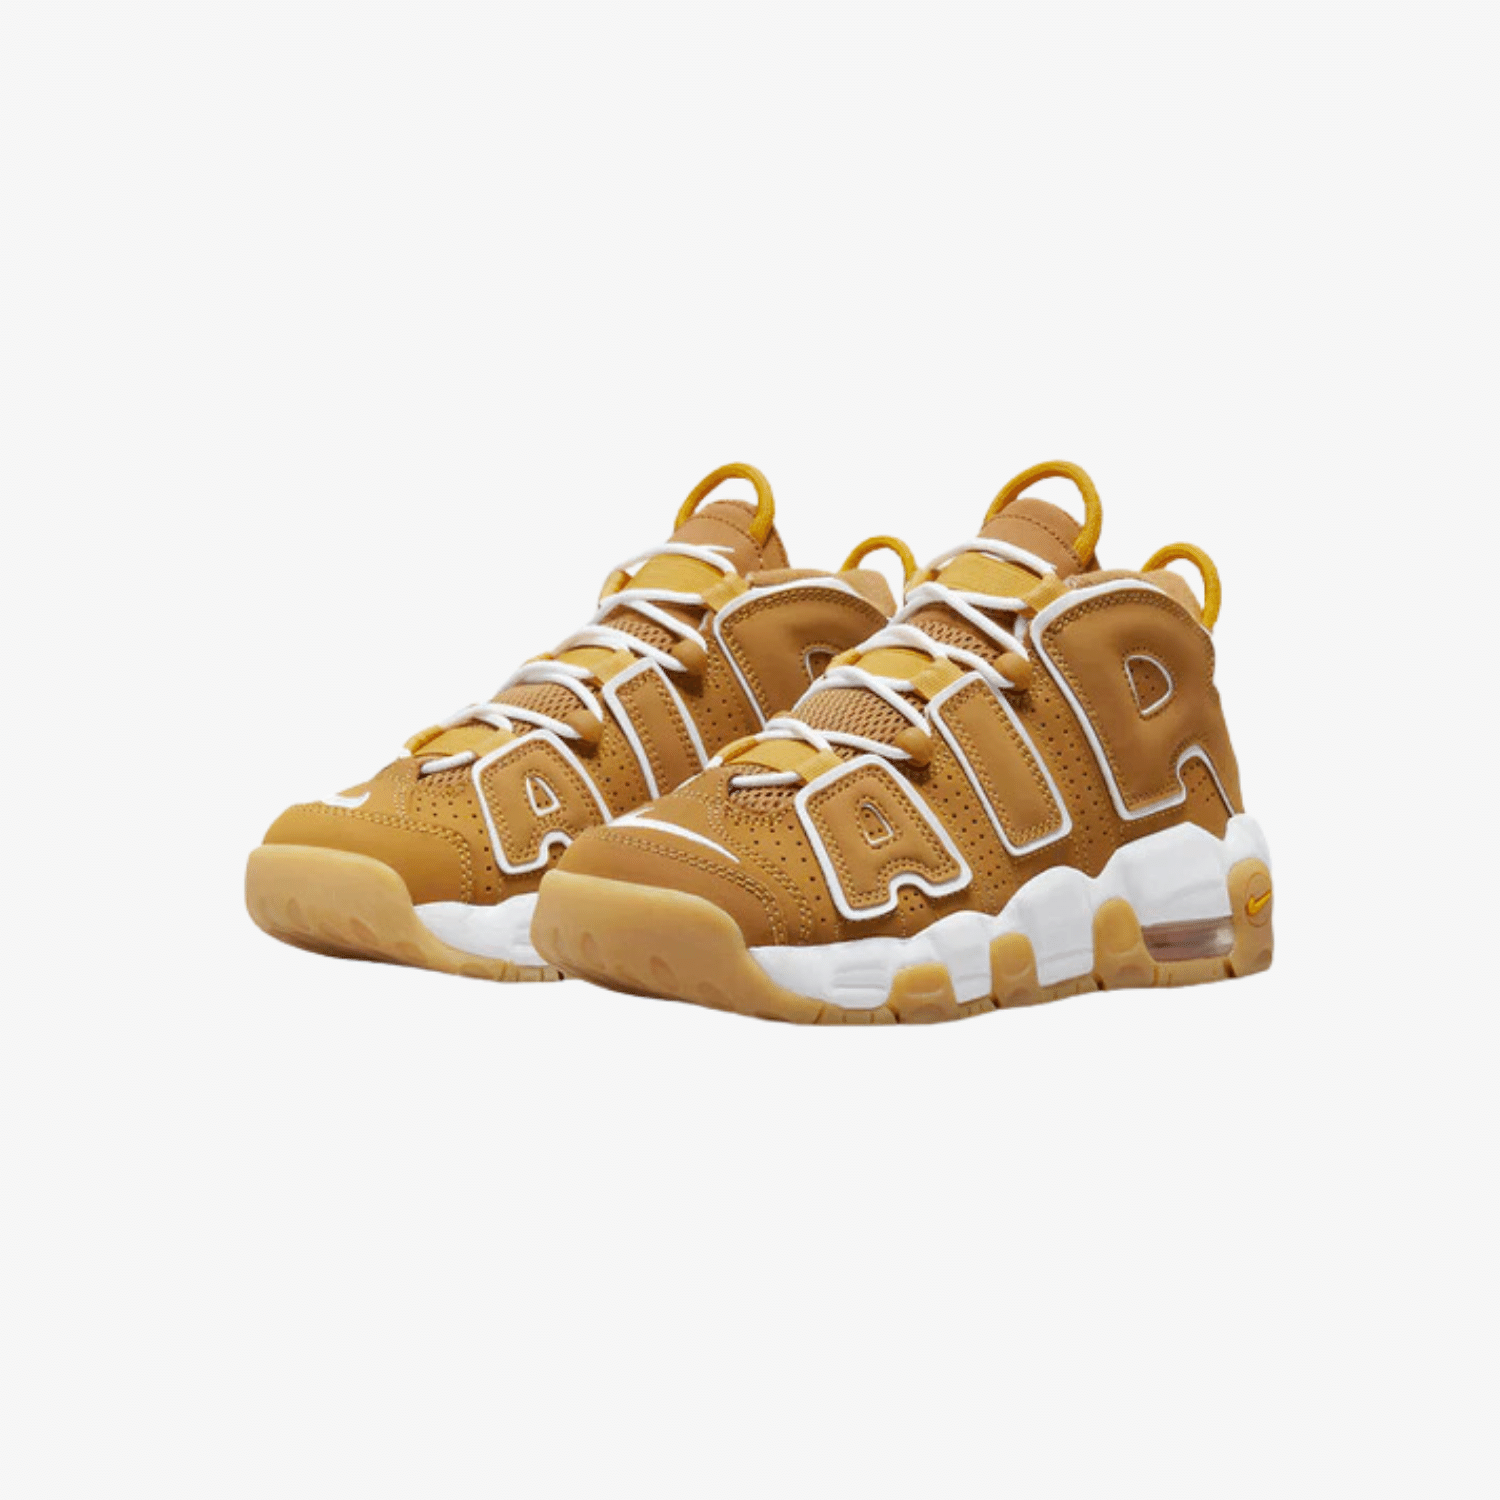     nike-air-more-uptempo-wheat-DQ4713-700-unfazed-2